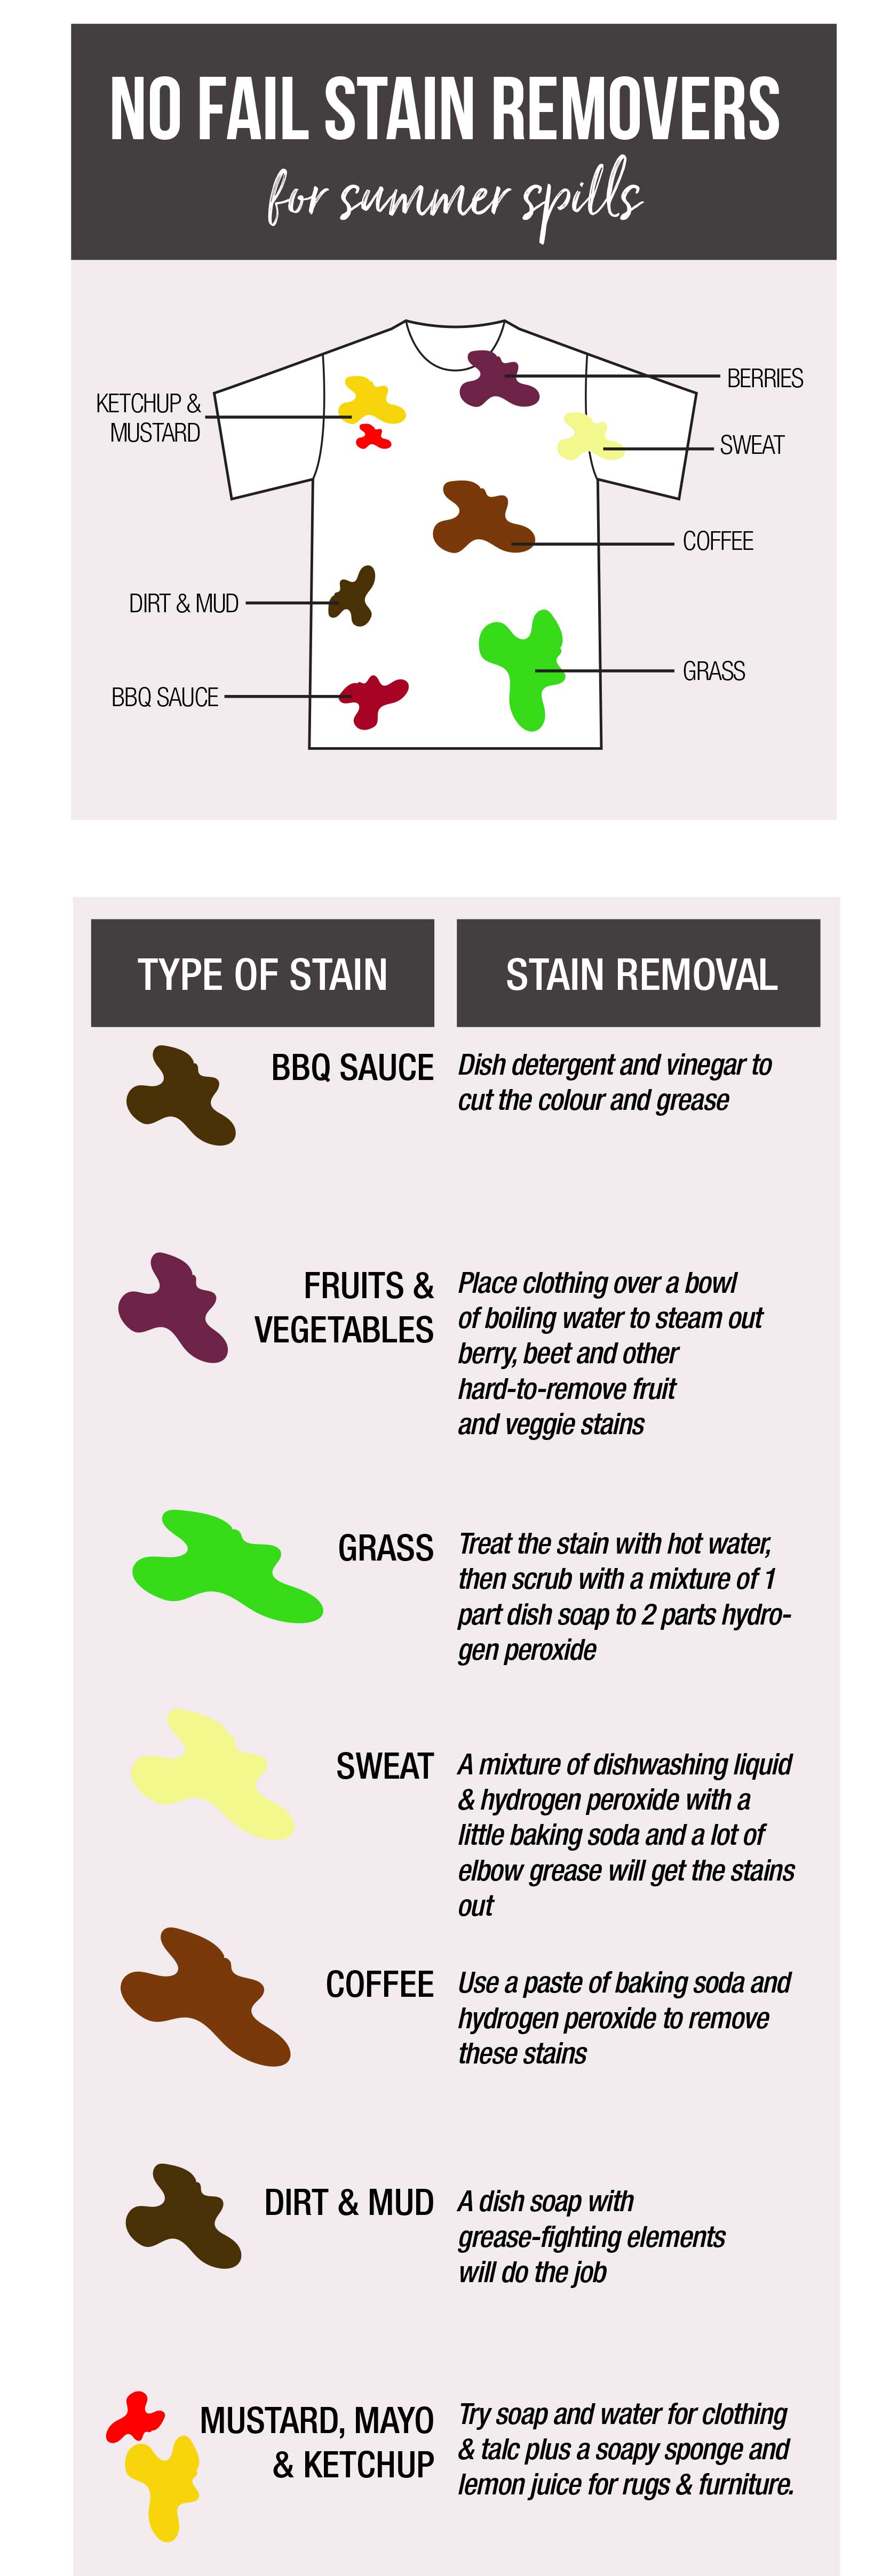 No fail stain removers for summer spills